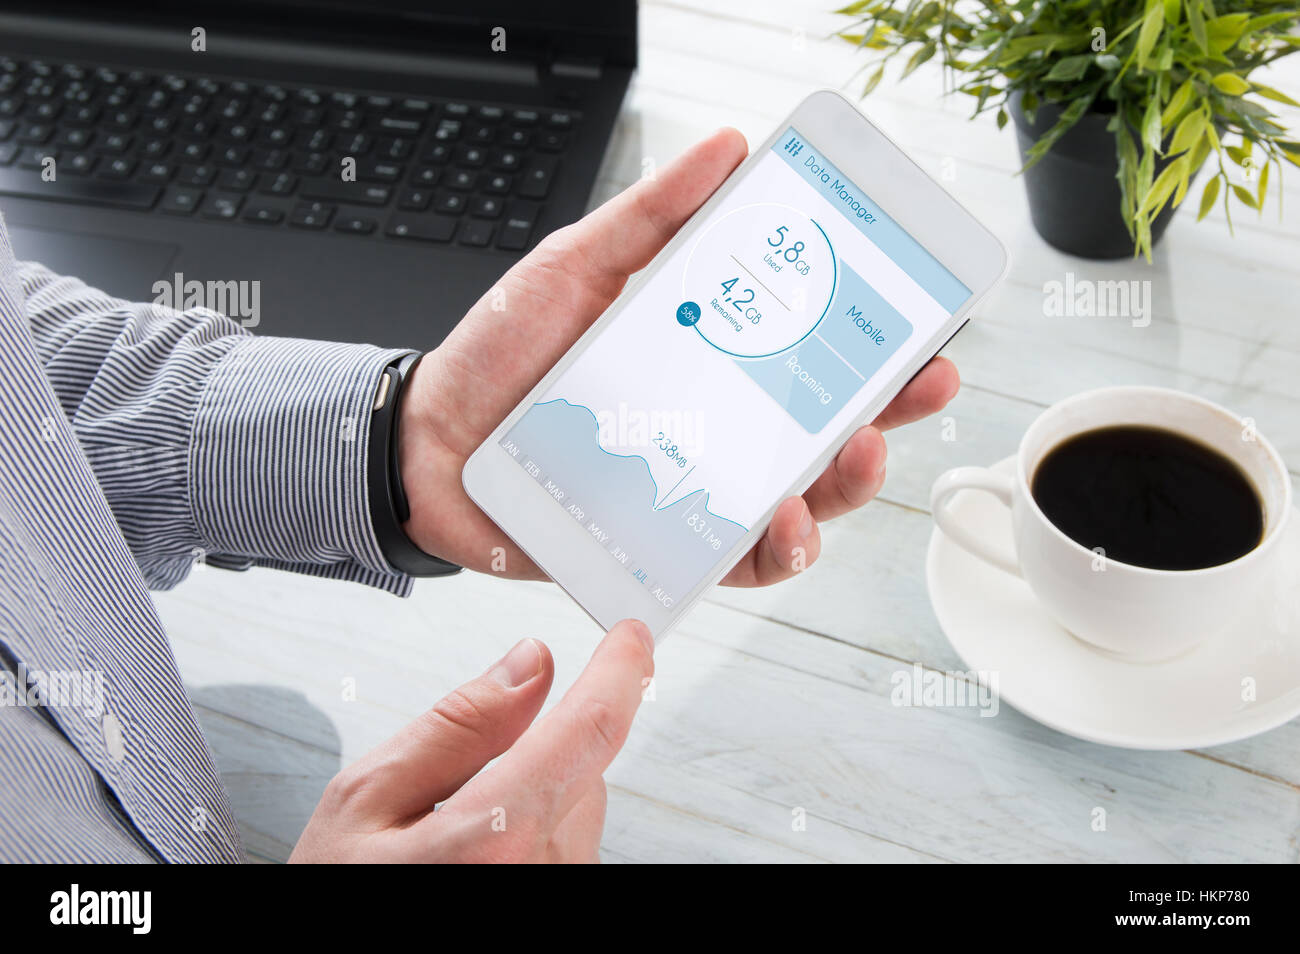 Man is checking data usage on his smartphone Stock Photo